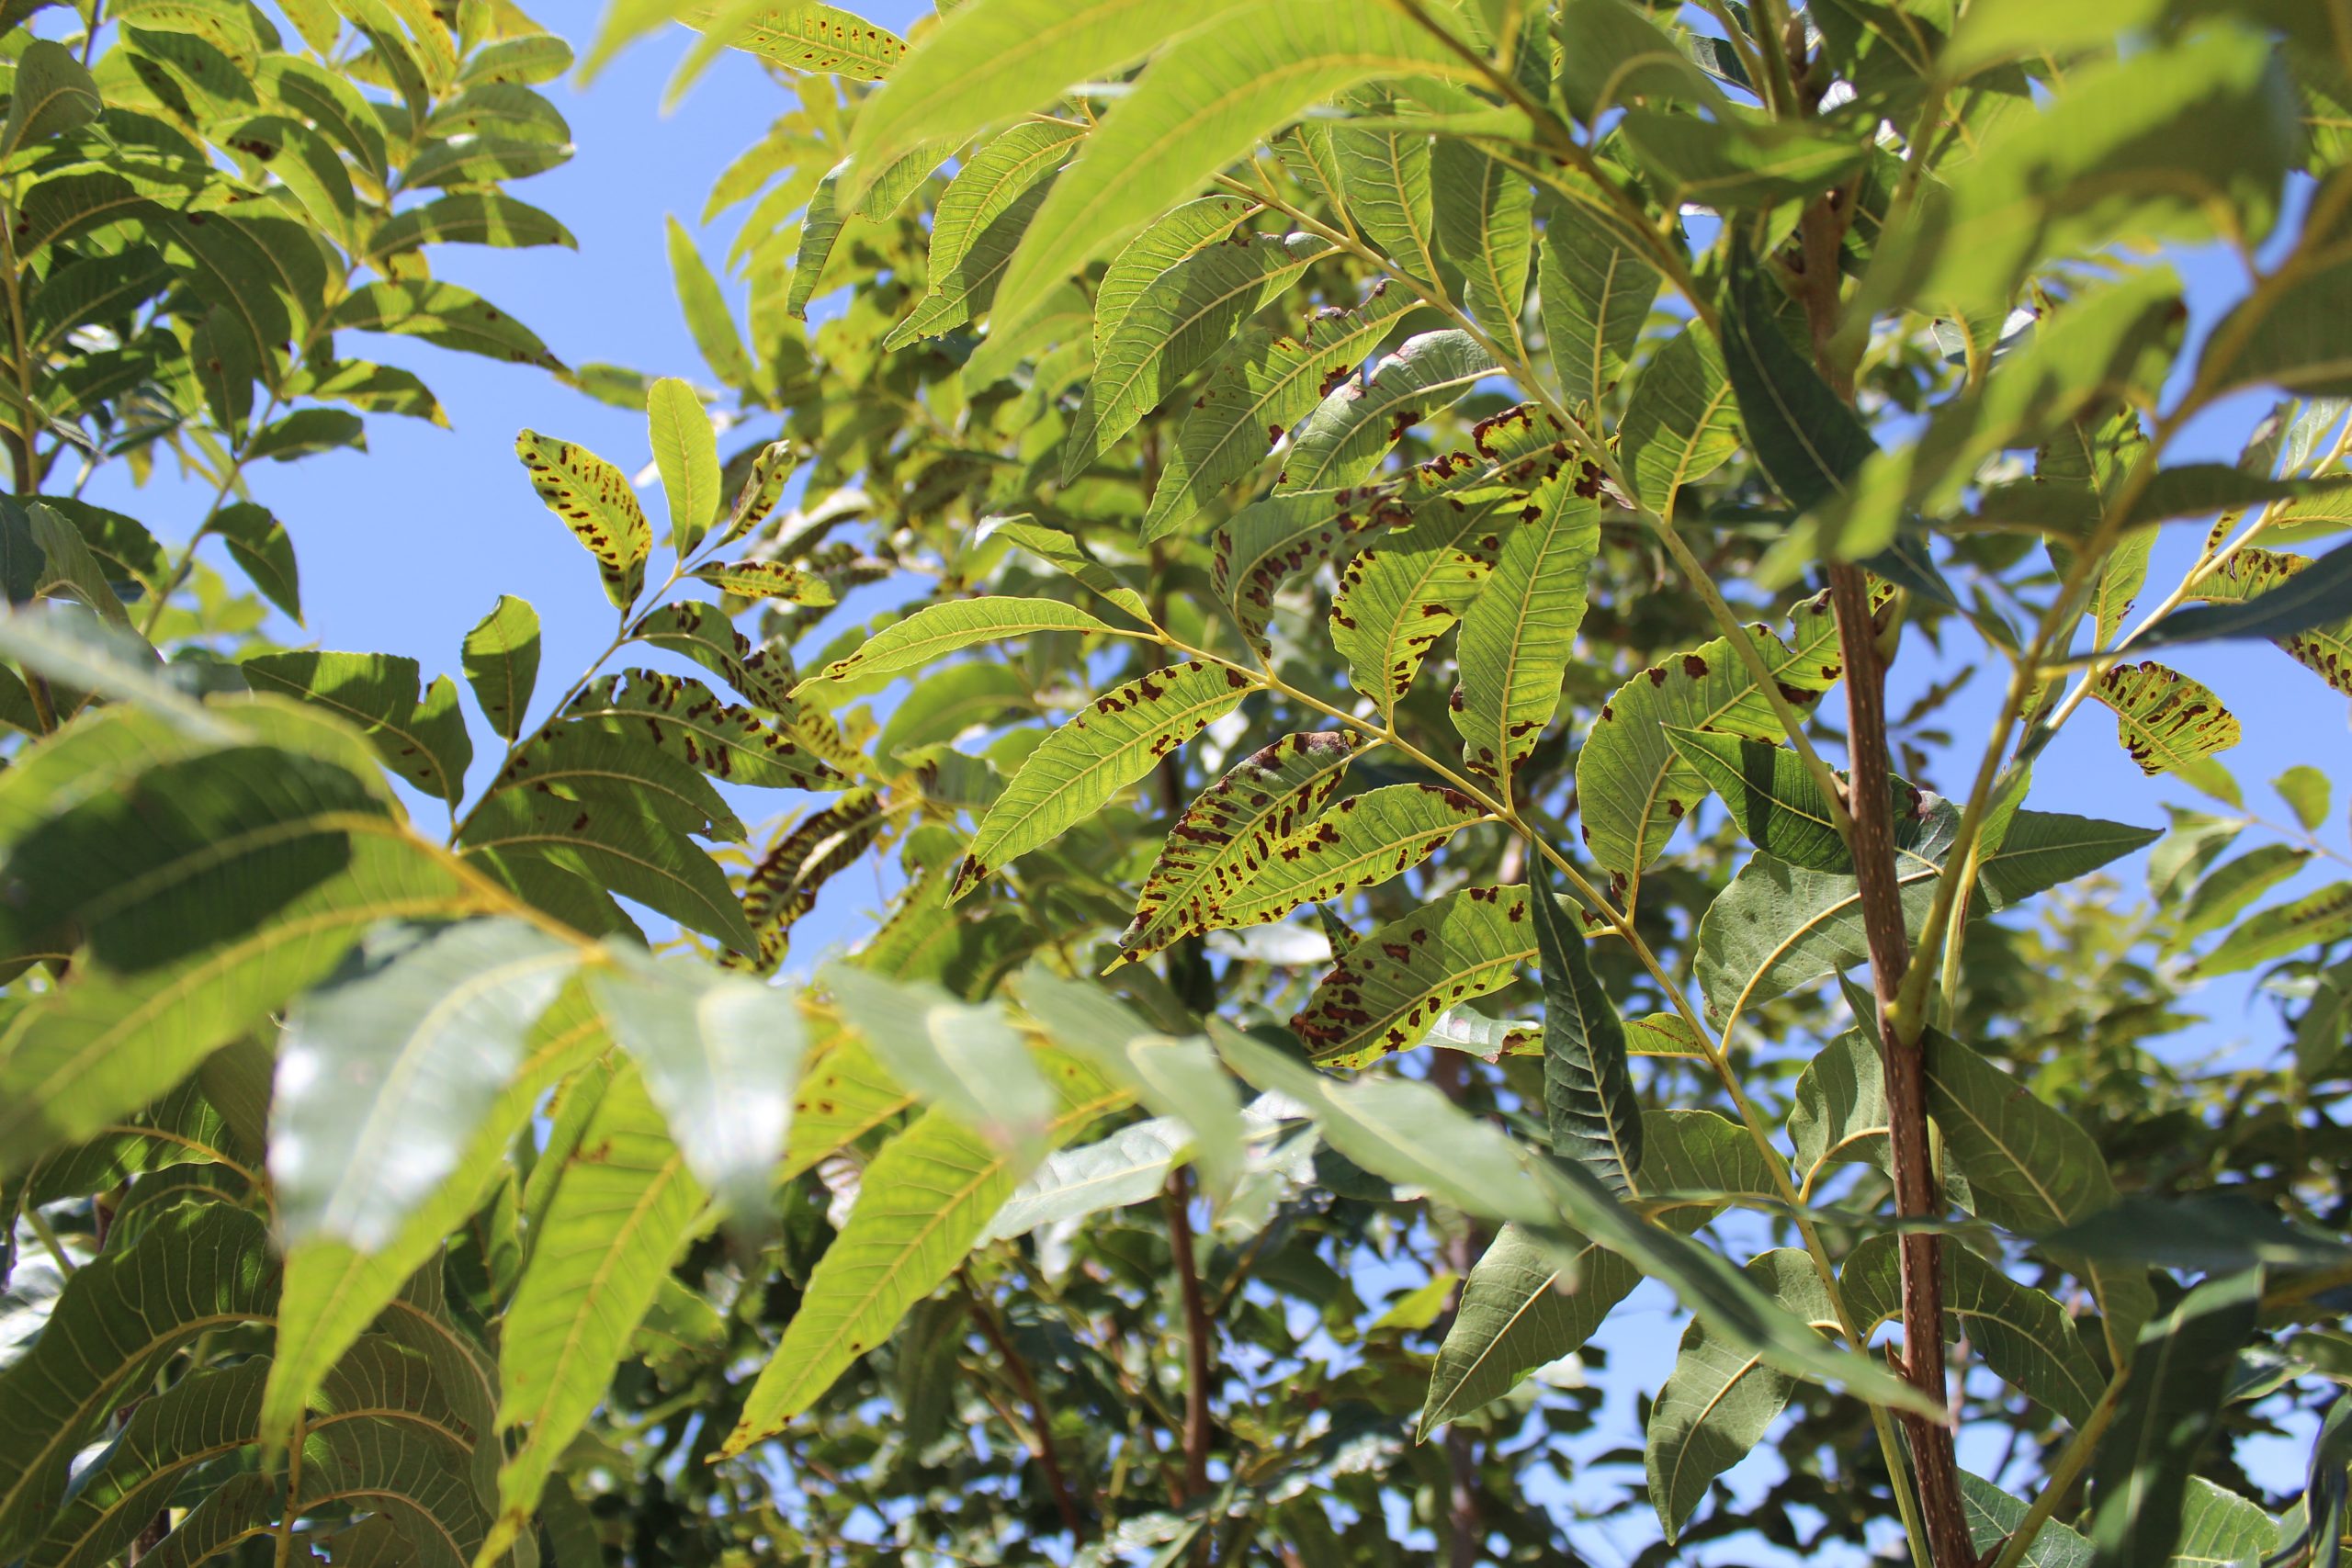 Leaves on a pecan tree show symptoms of zinc deficiency. They have splotches of yellow and dark brown and are wilting. Leaf tissue analysis can give a better picture of this tree's nutritional health.